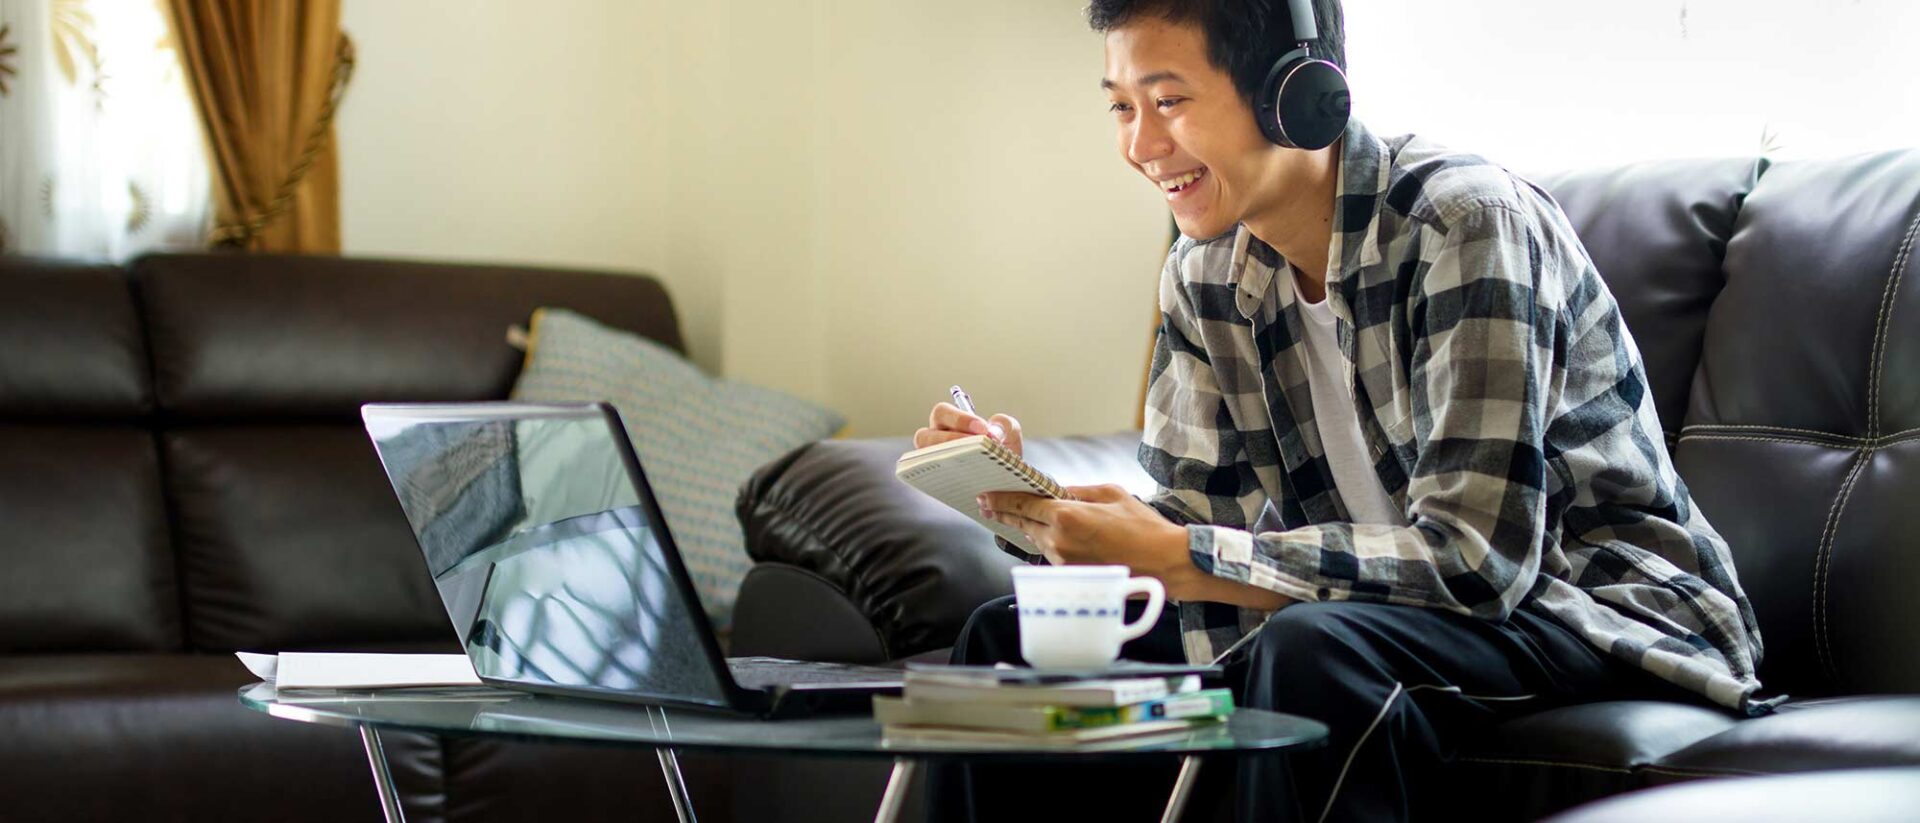 Student with his headset on and taking notes during an online class